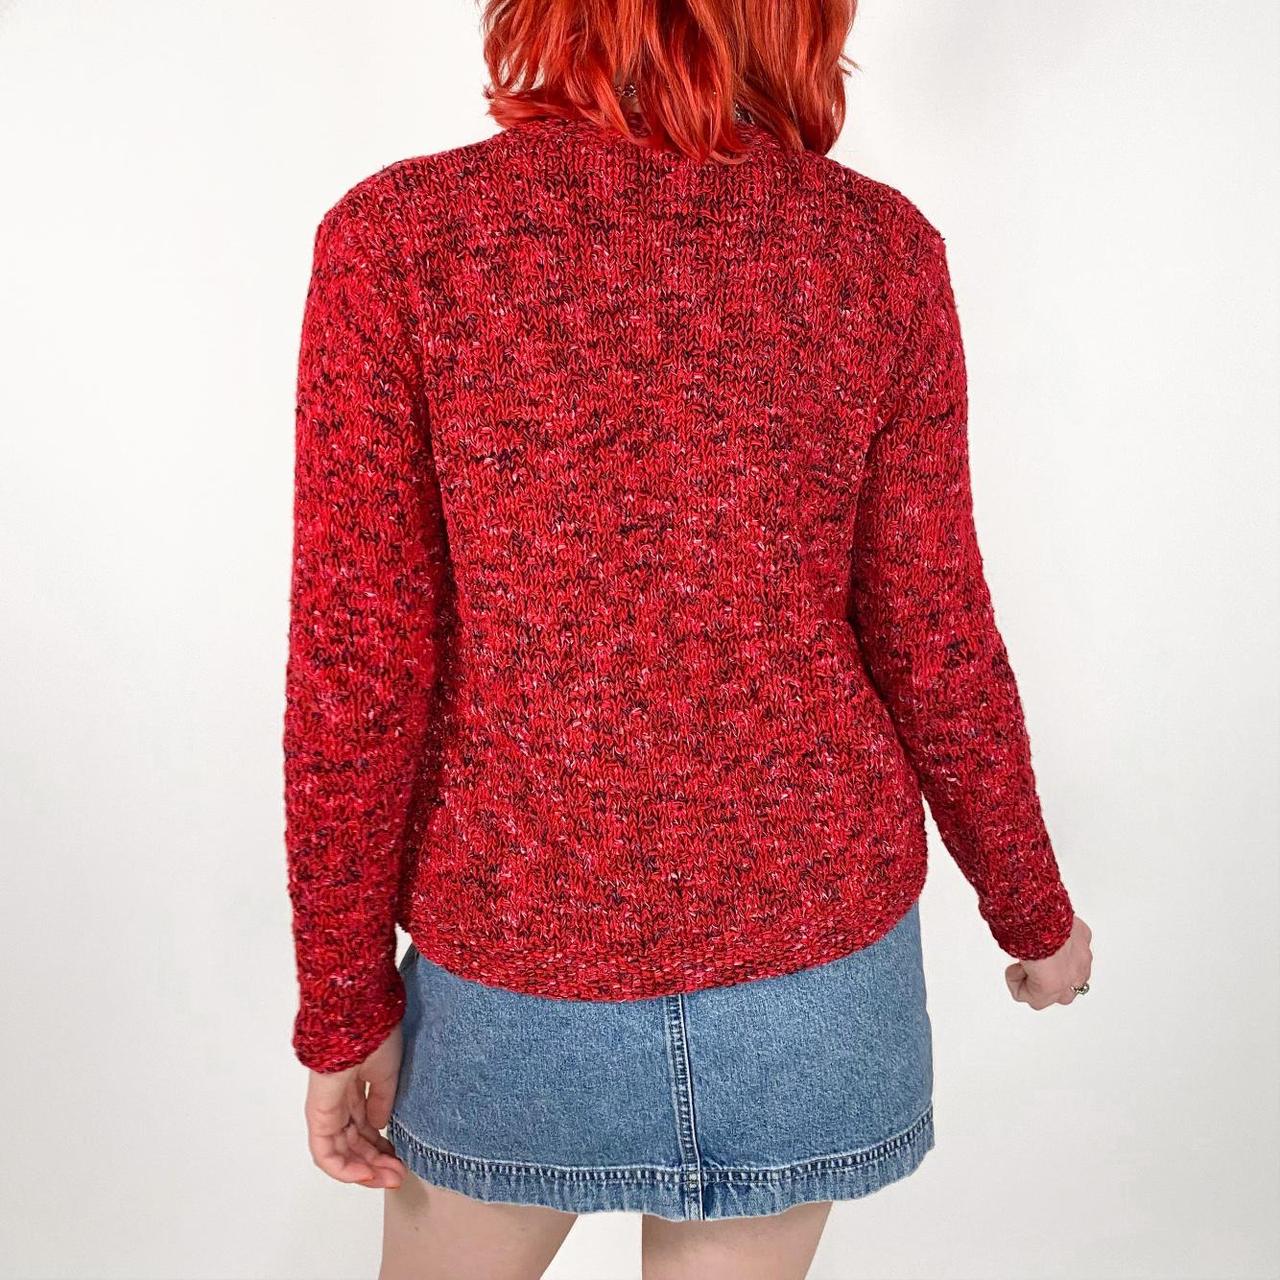 Product Image 3 - Red marble knit cardigan 🍓

Fits